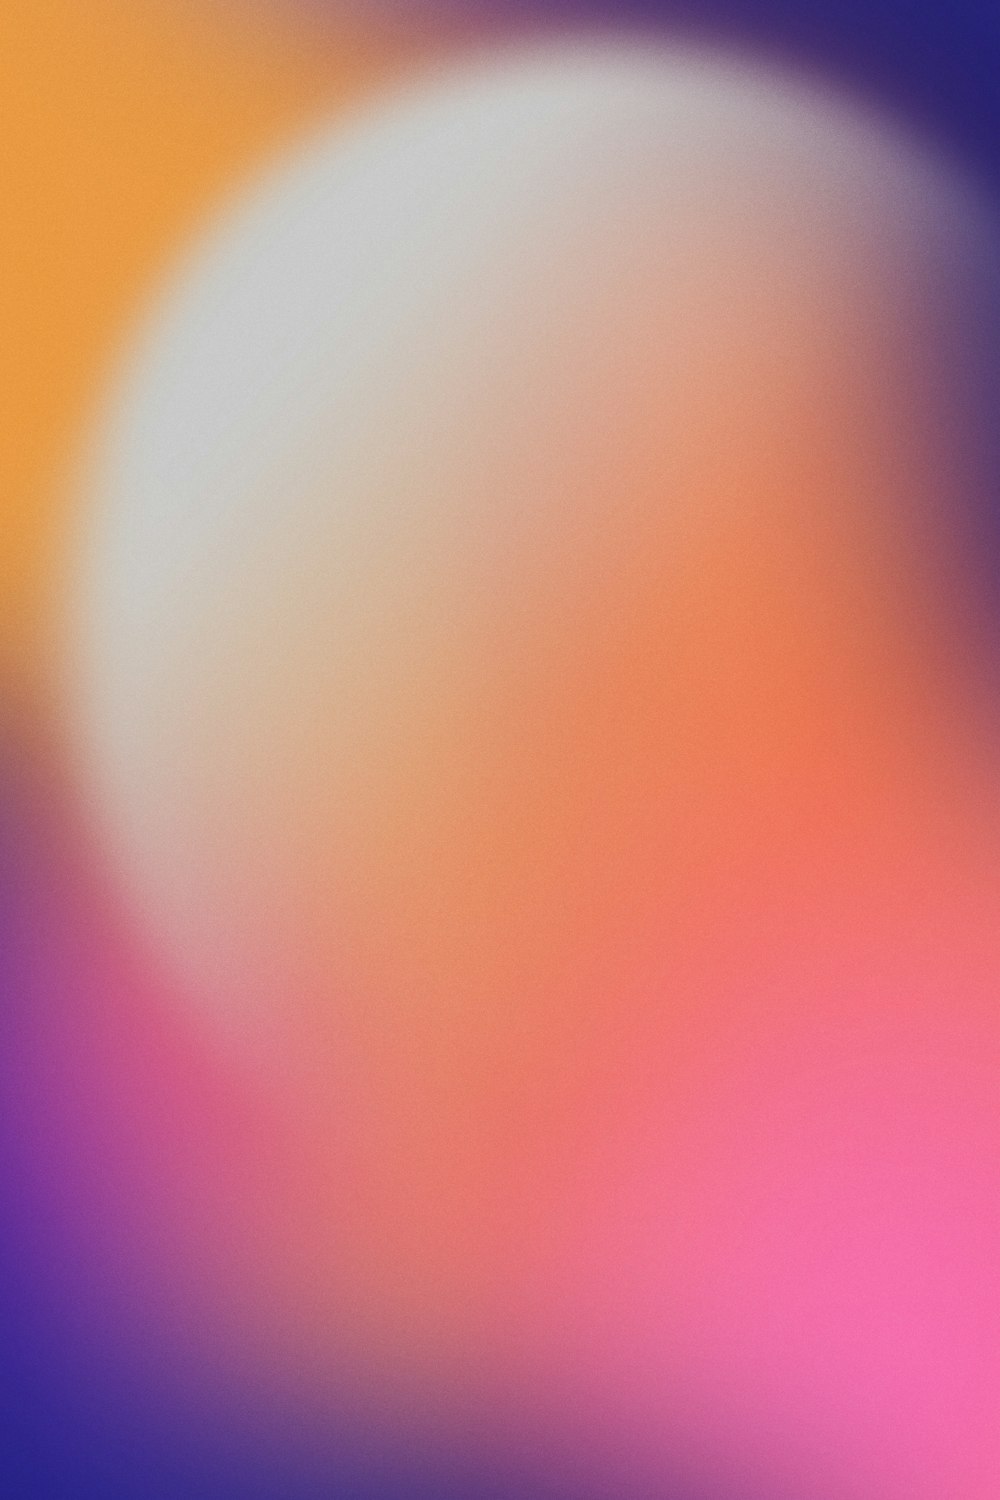 a blurry image of a purple and orange background